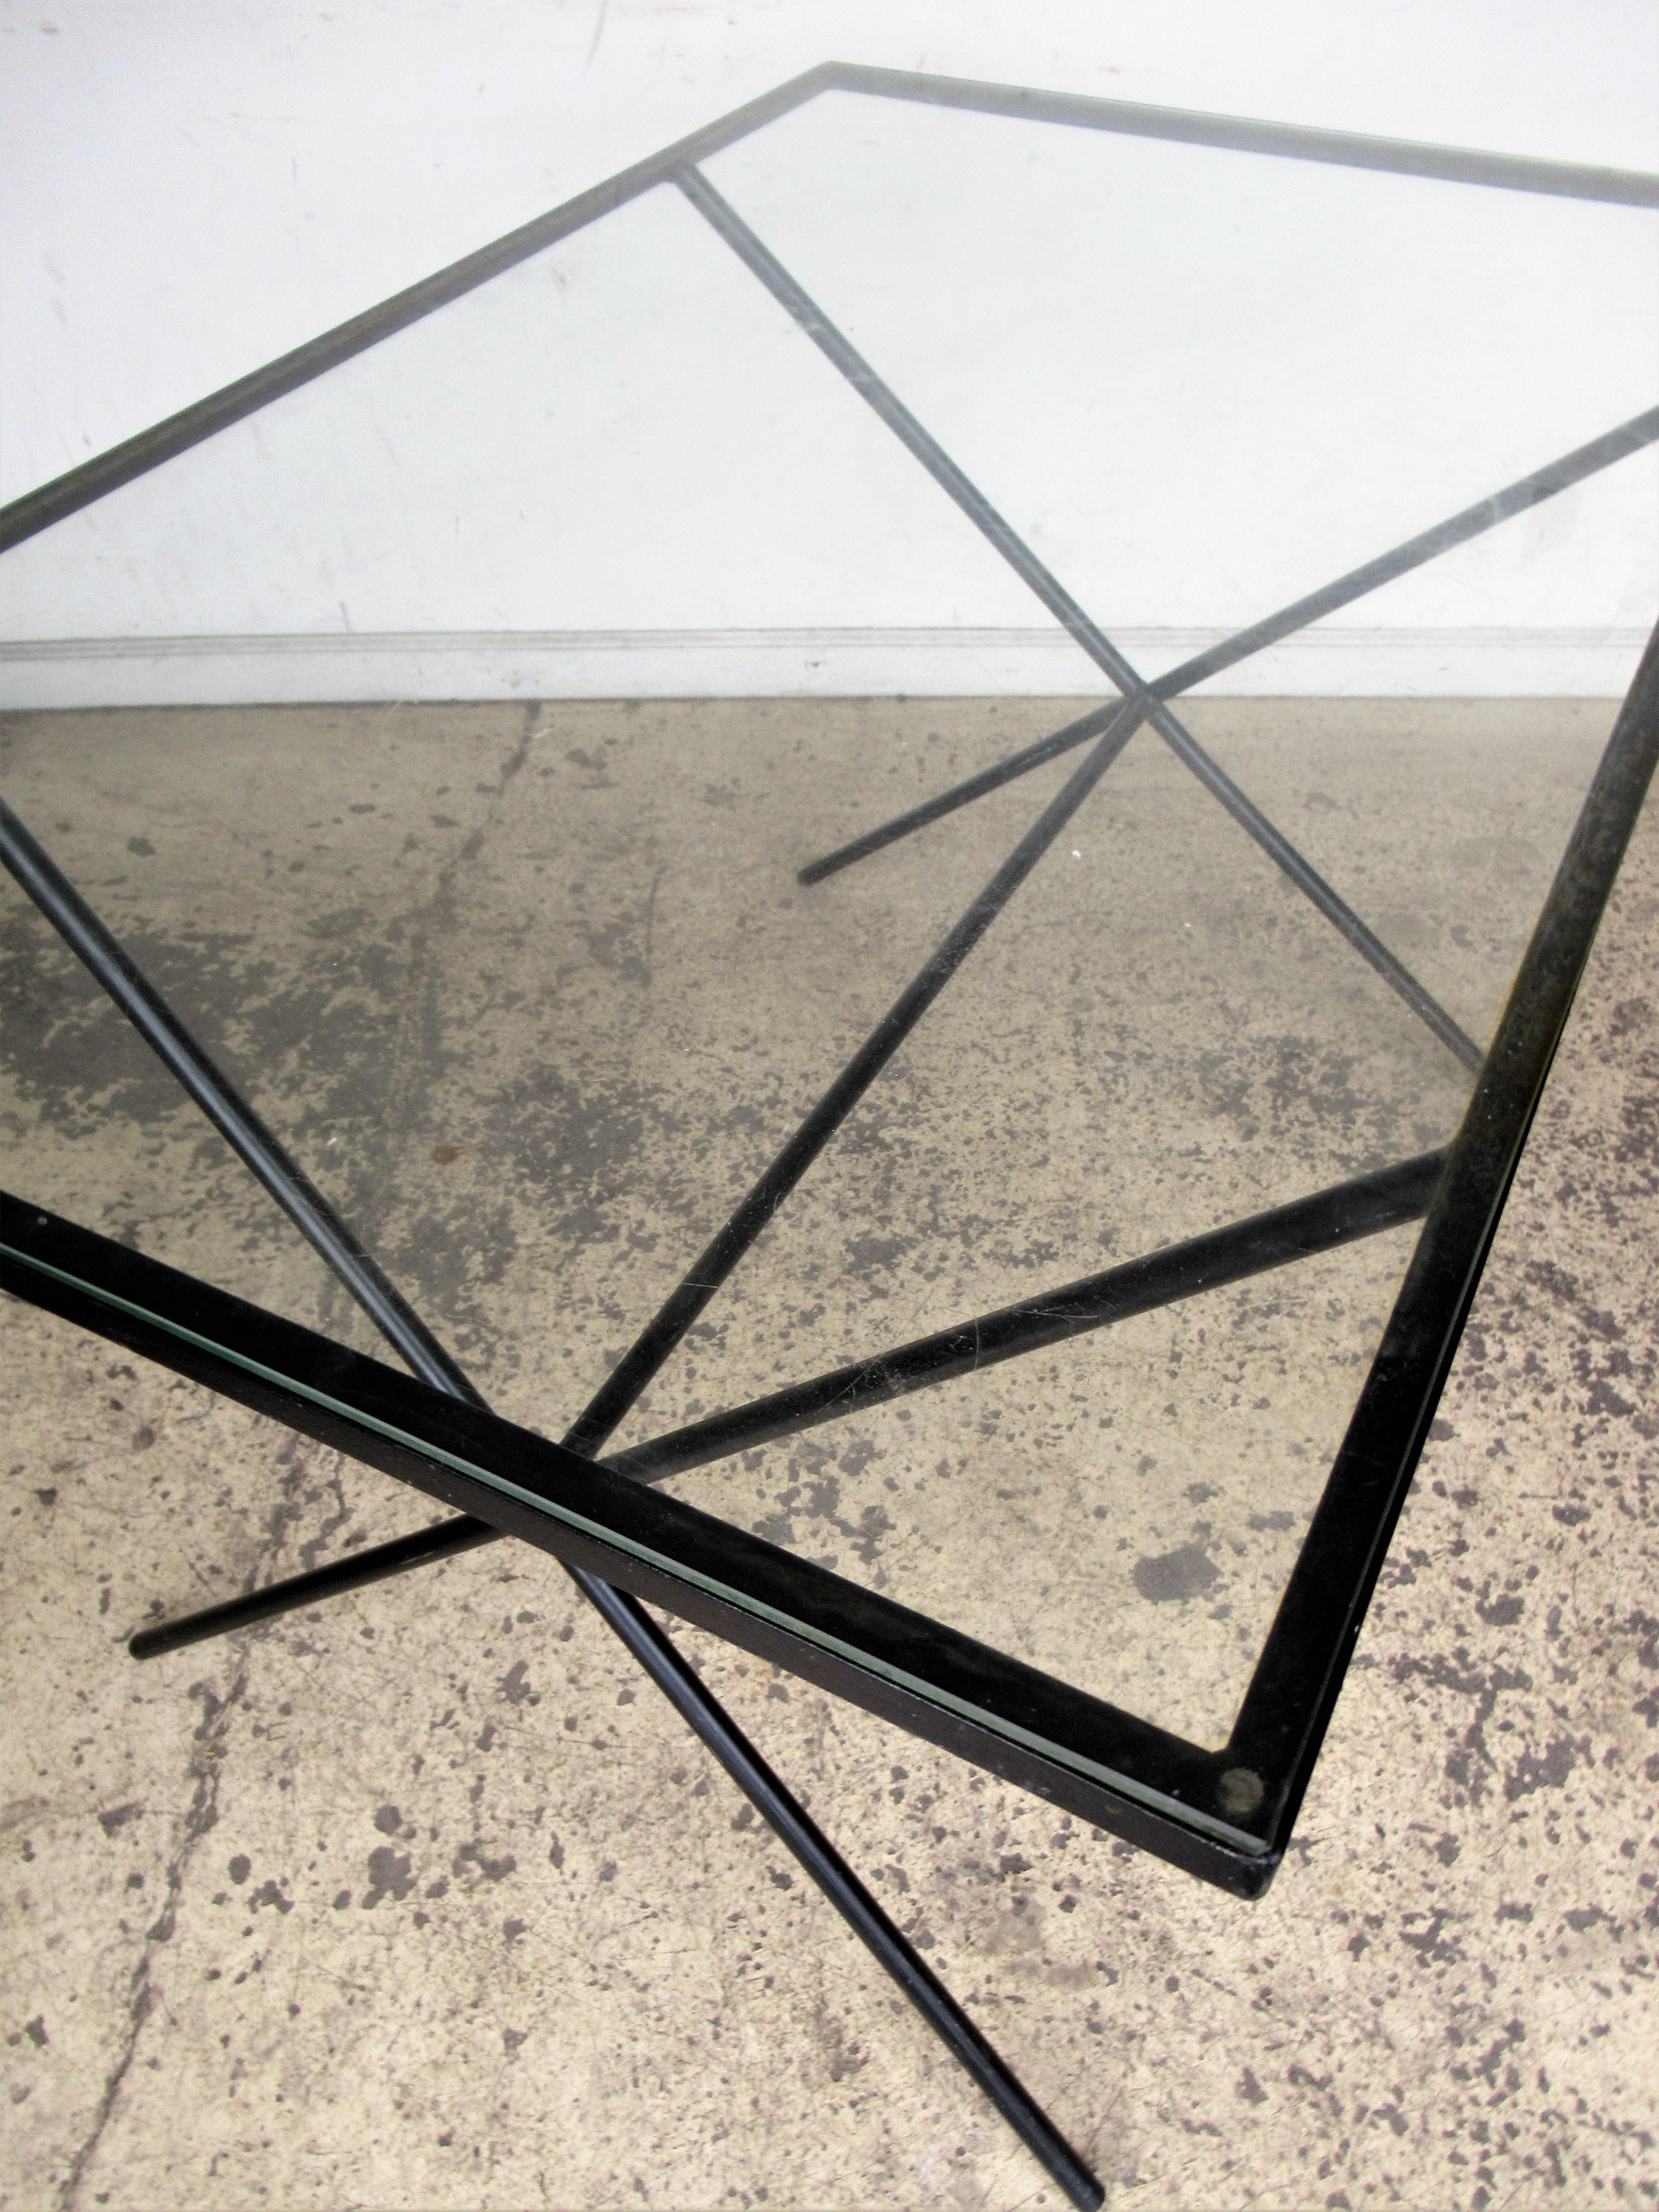  Architectural Modernist Iron Table by Muriel Coleman 1